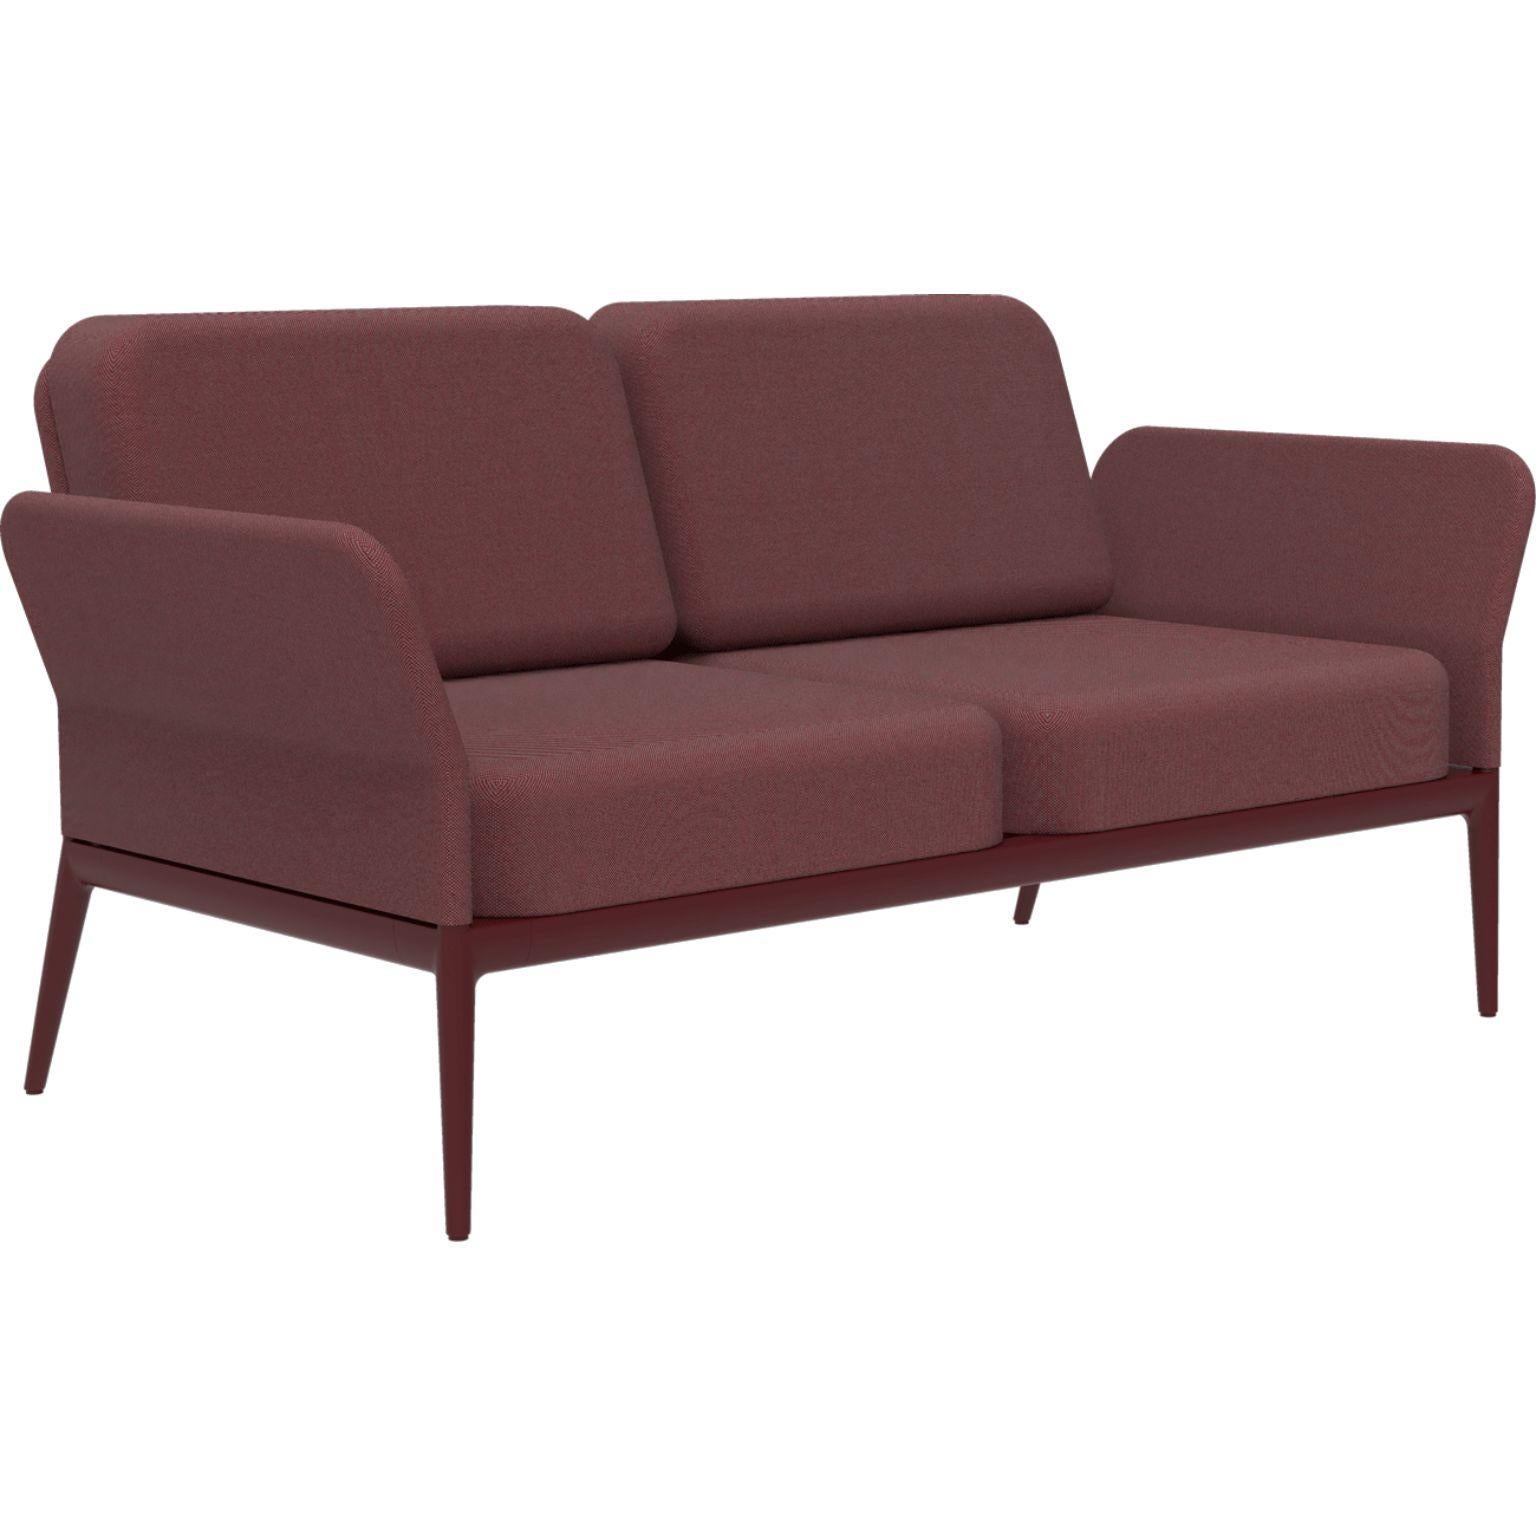 Cover burgundy sofa by MOWEE
Dimensions: D83 x W160 x H81 cm (seat height 42 cm).
Material: Aluminum and upholstery.
Weight: 32 kg.
Also available in different colors and finishes. 

An unmistakable collection for its beauty and robustness. A